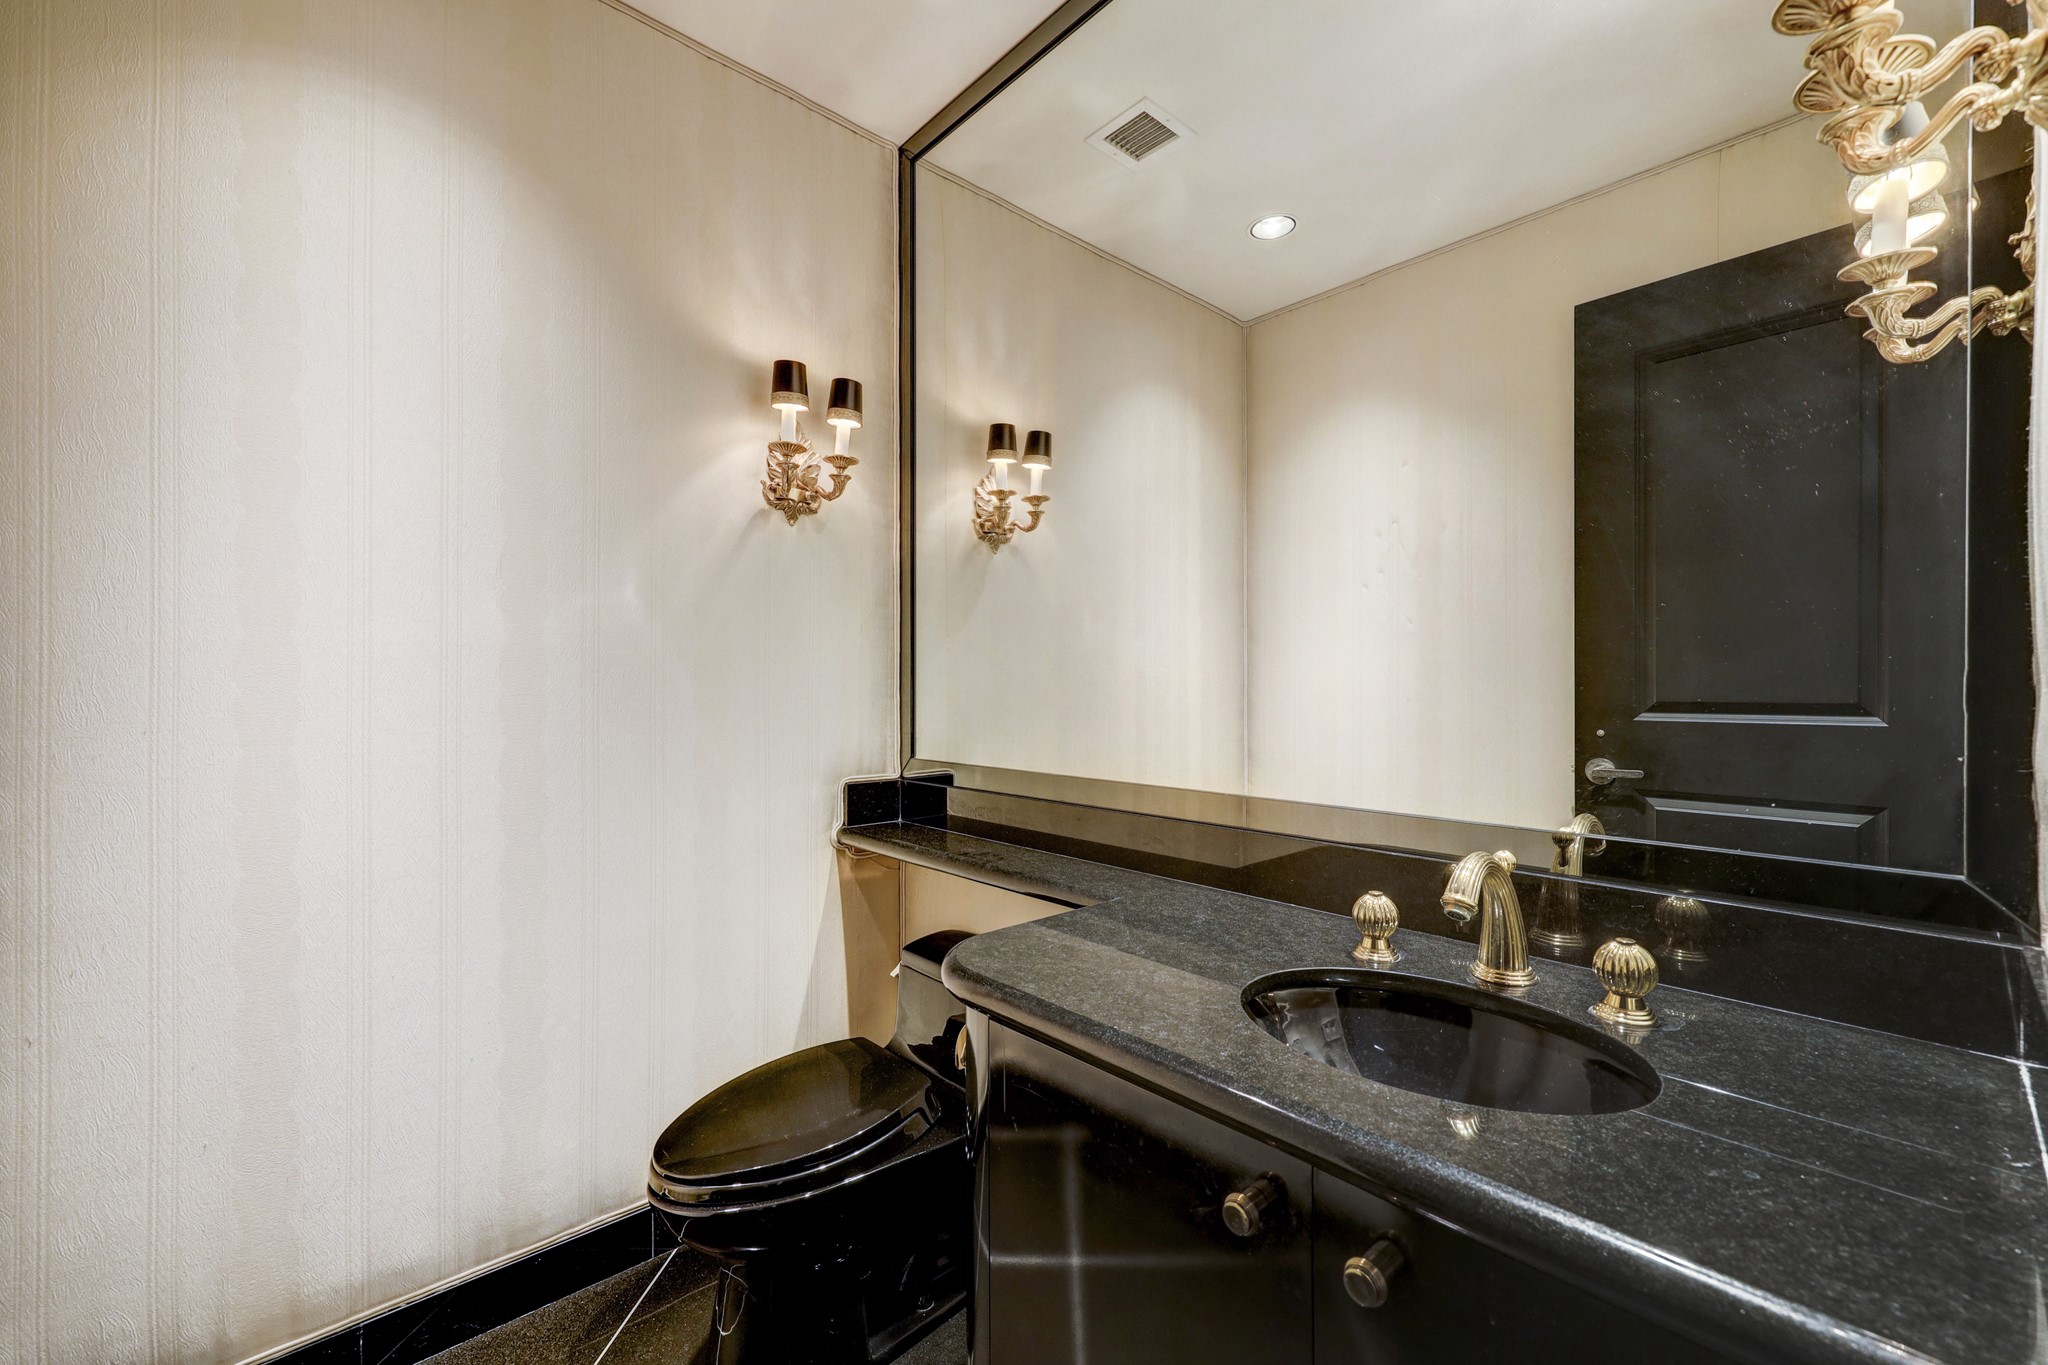 The powder room, which is located just off the Entry, features black granite floors and fabric wallpaper.